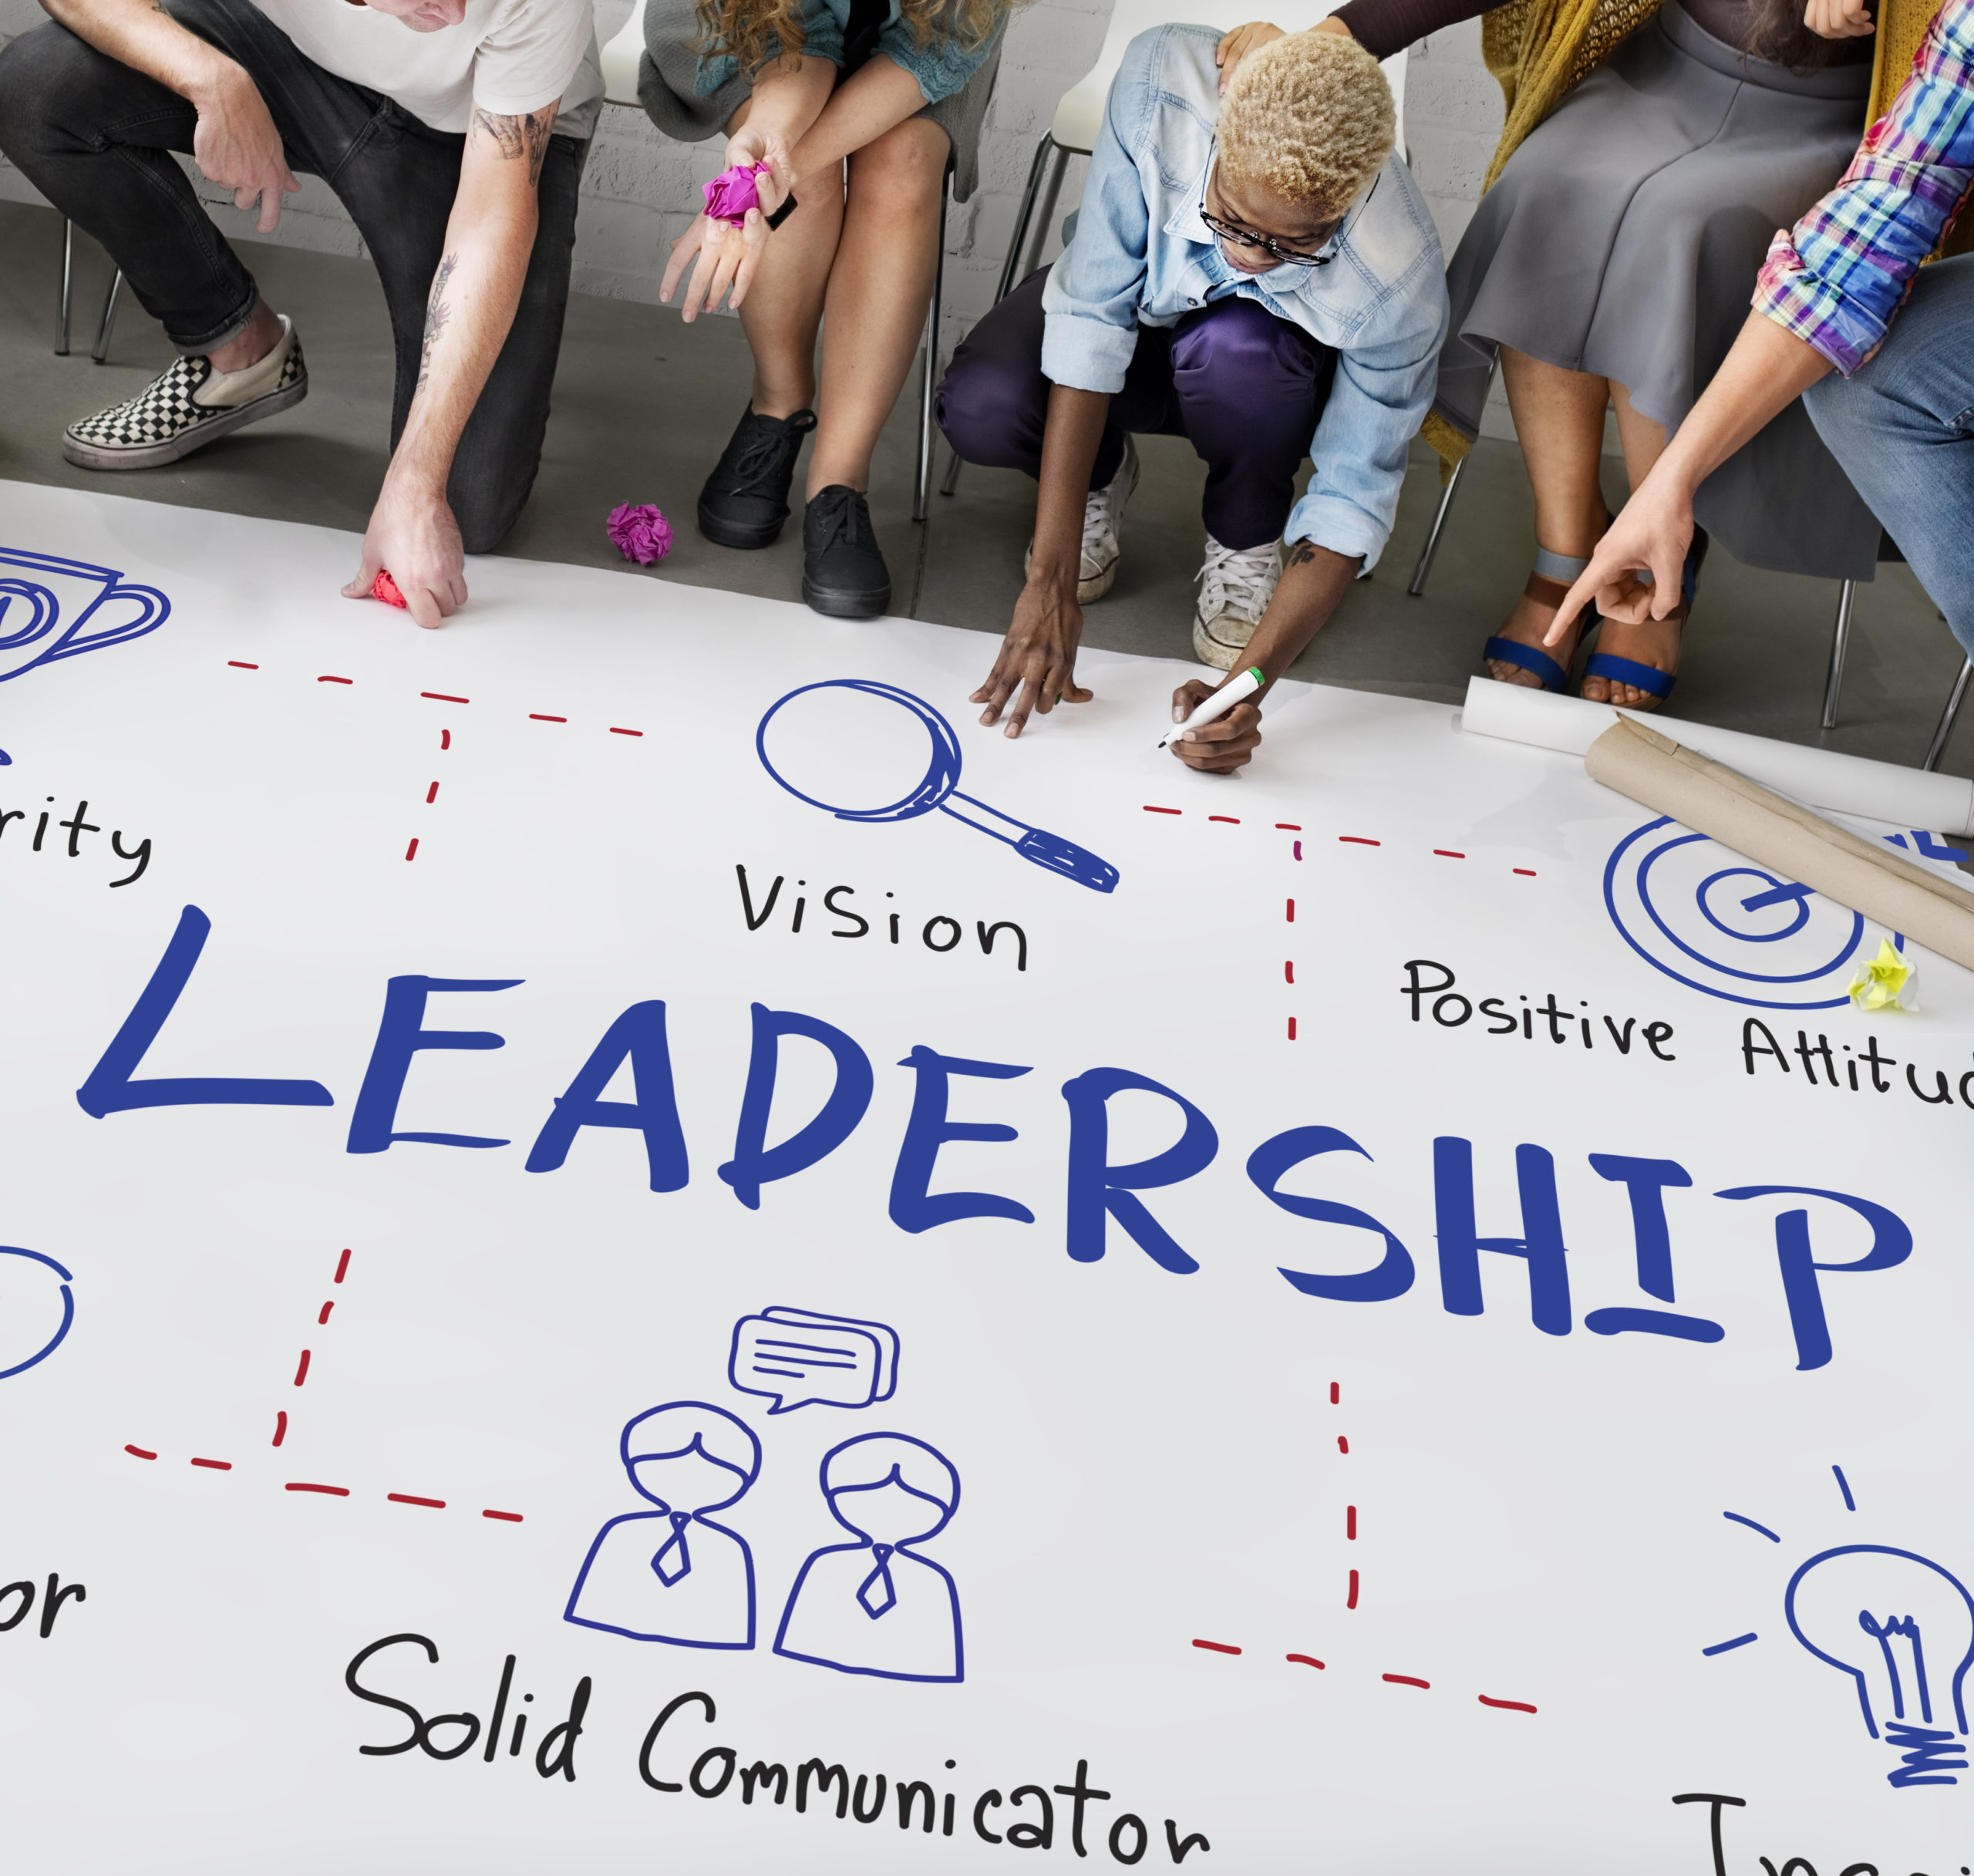 Leadership Lessons for Better Collaboration